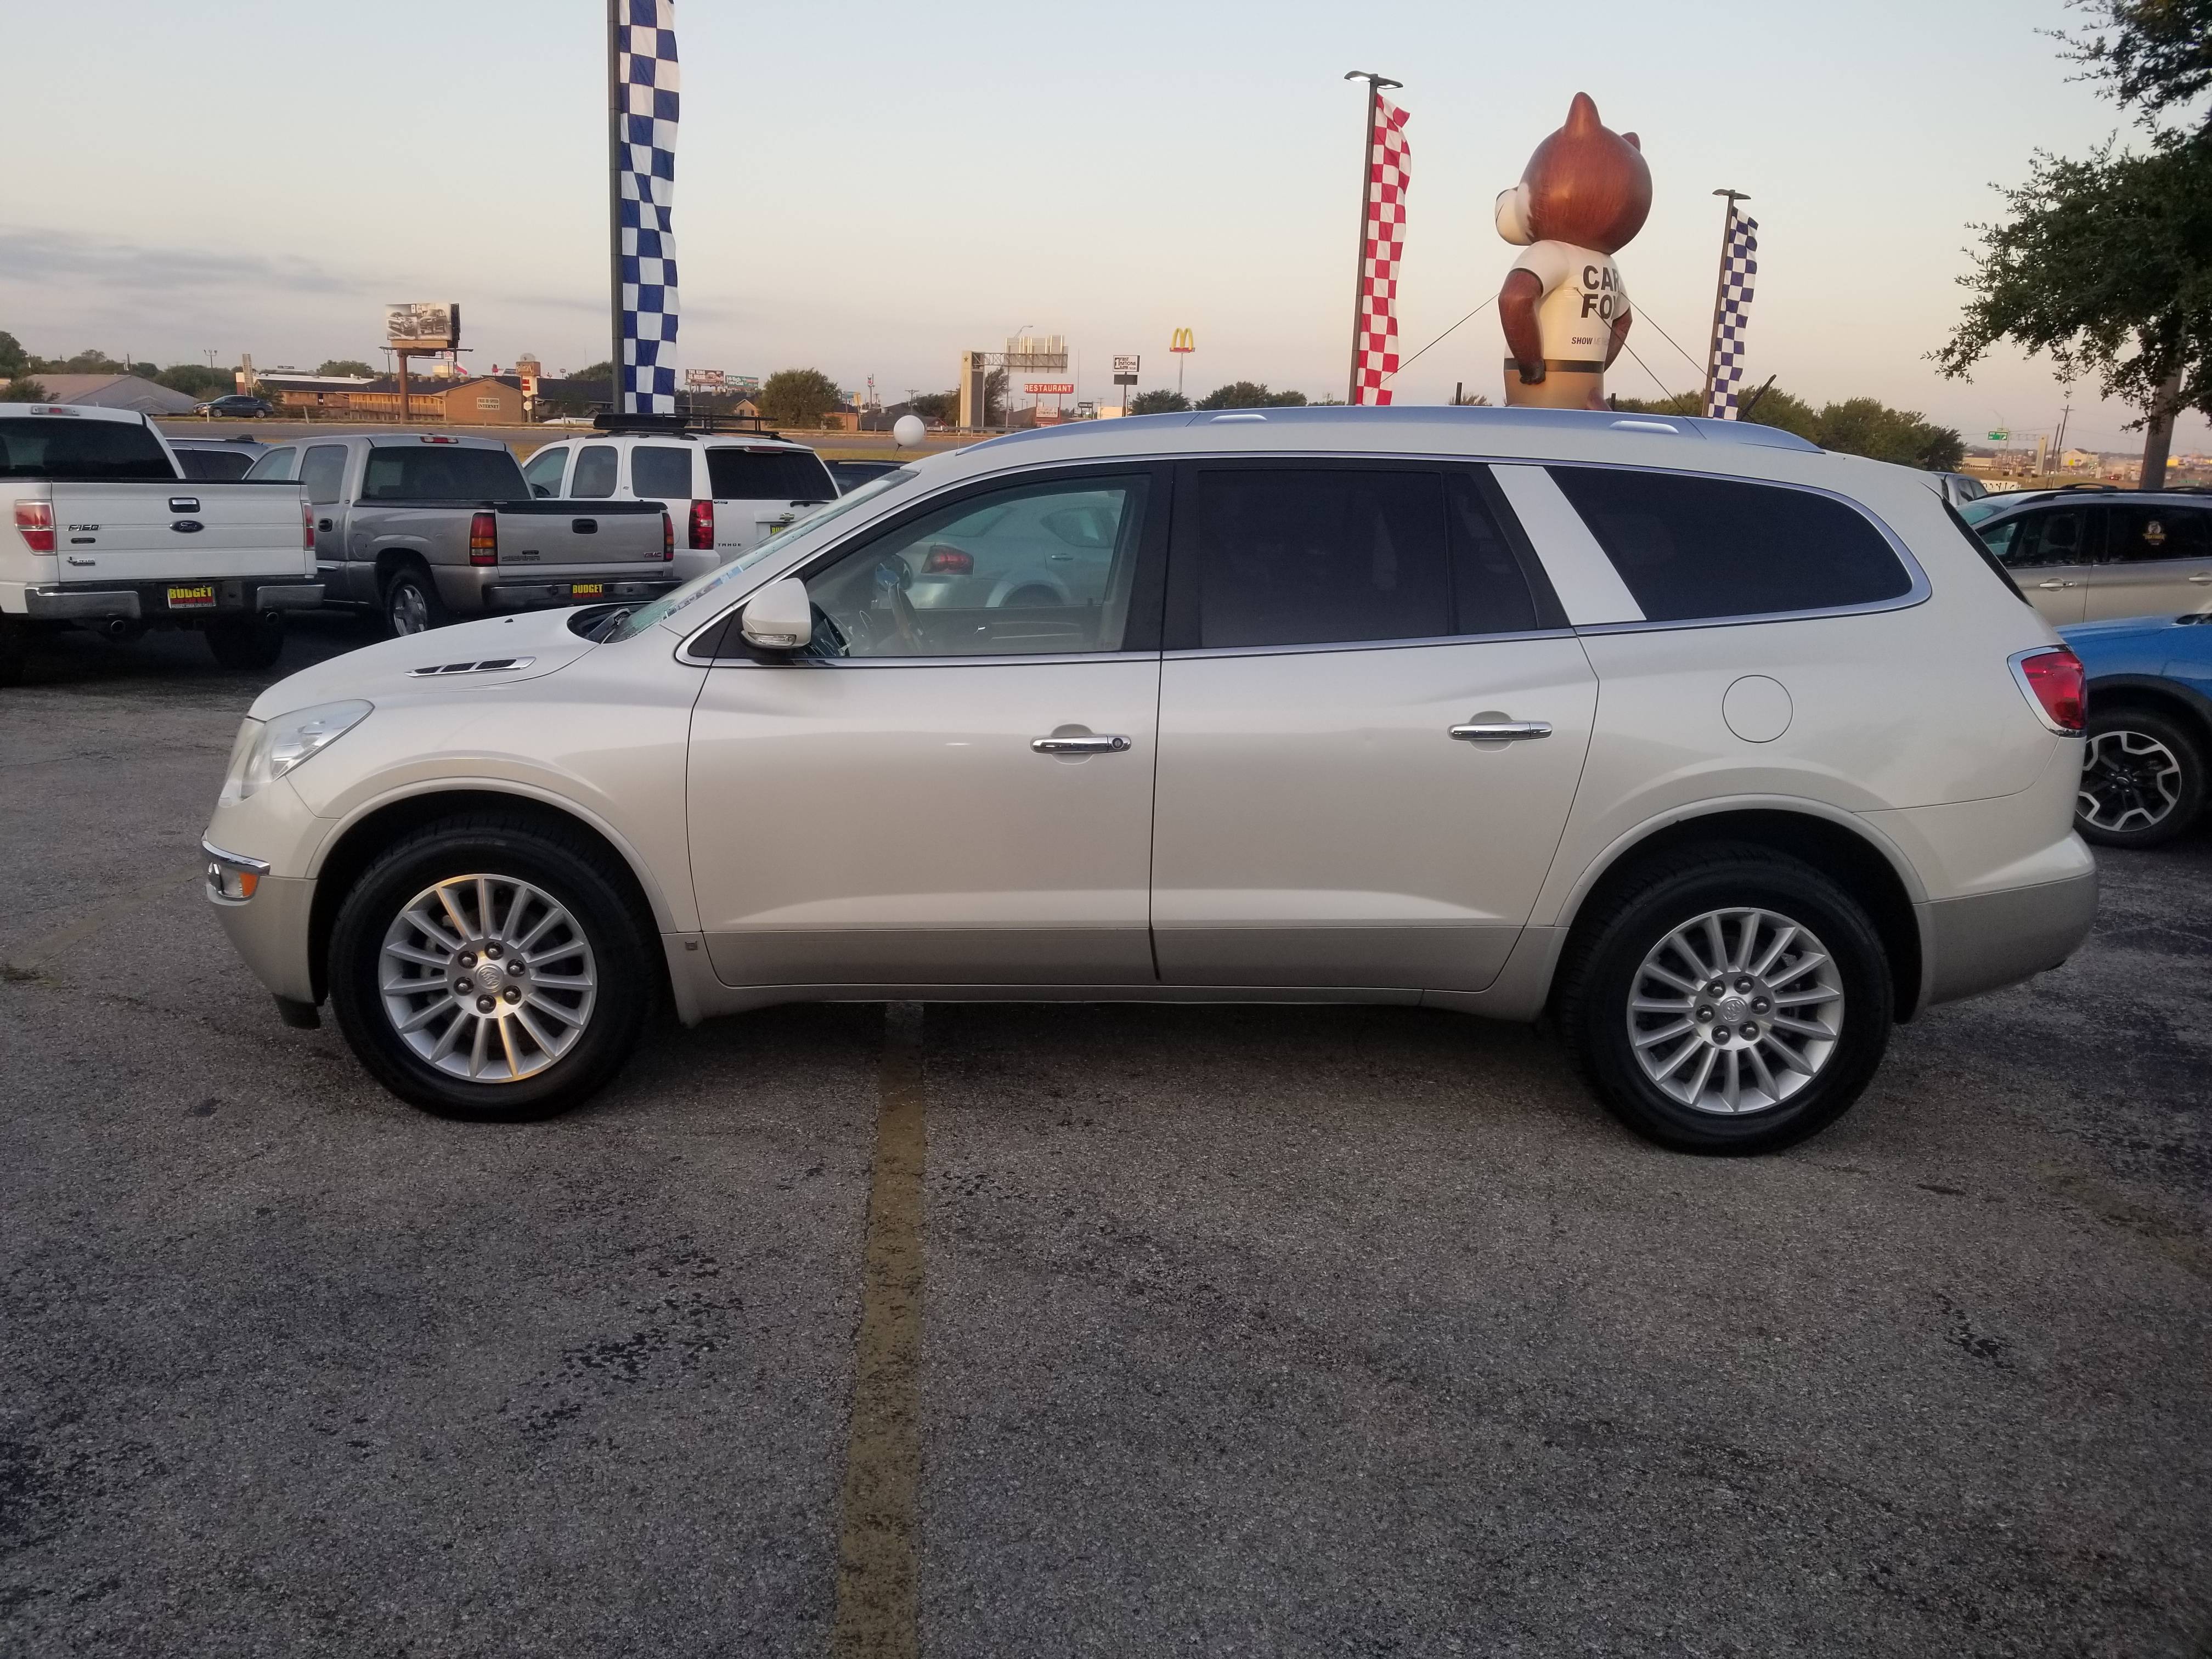 Used 2010 Buick Enclave CX for sale in KILLEEN | 25123 | BUDGET USED ...